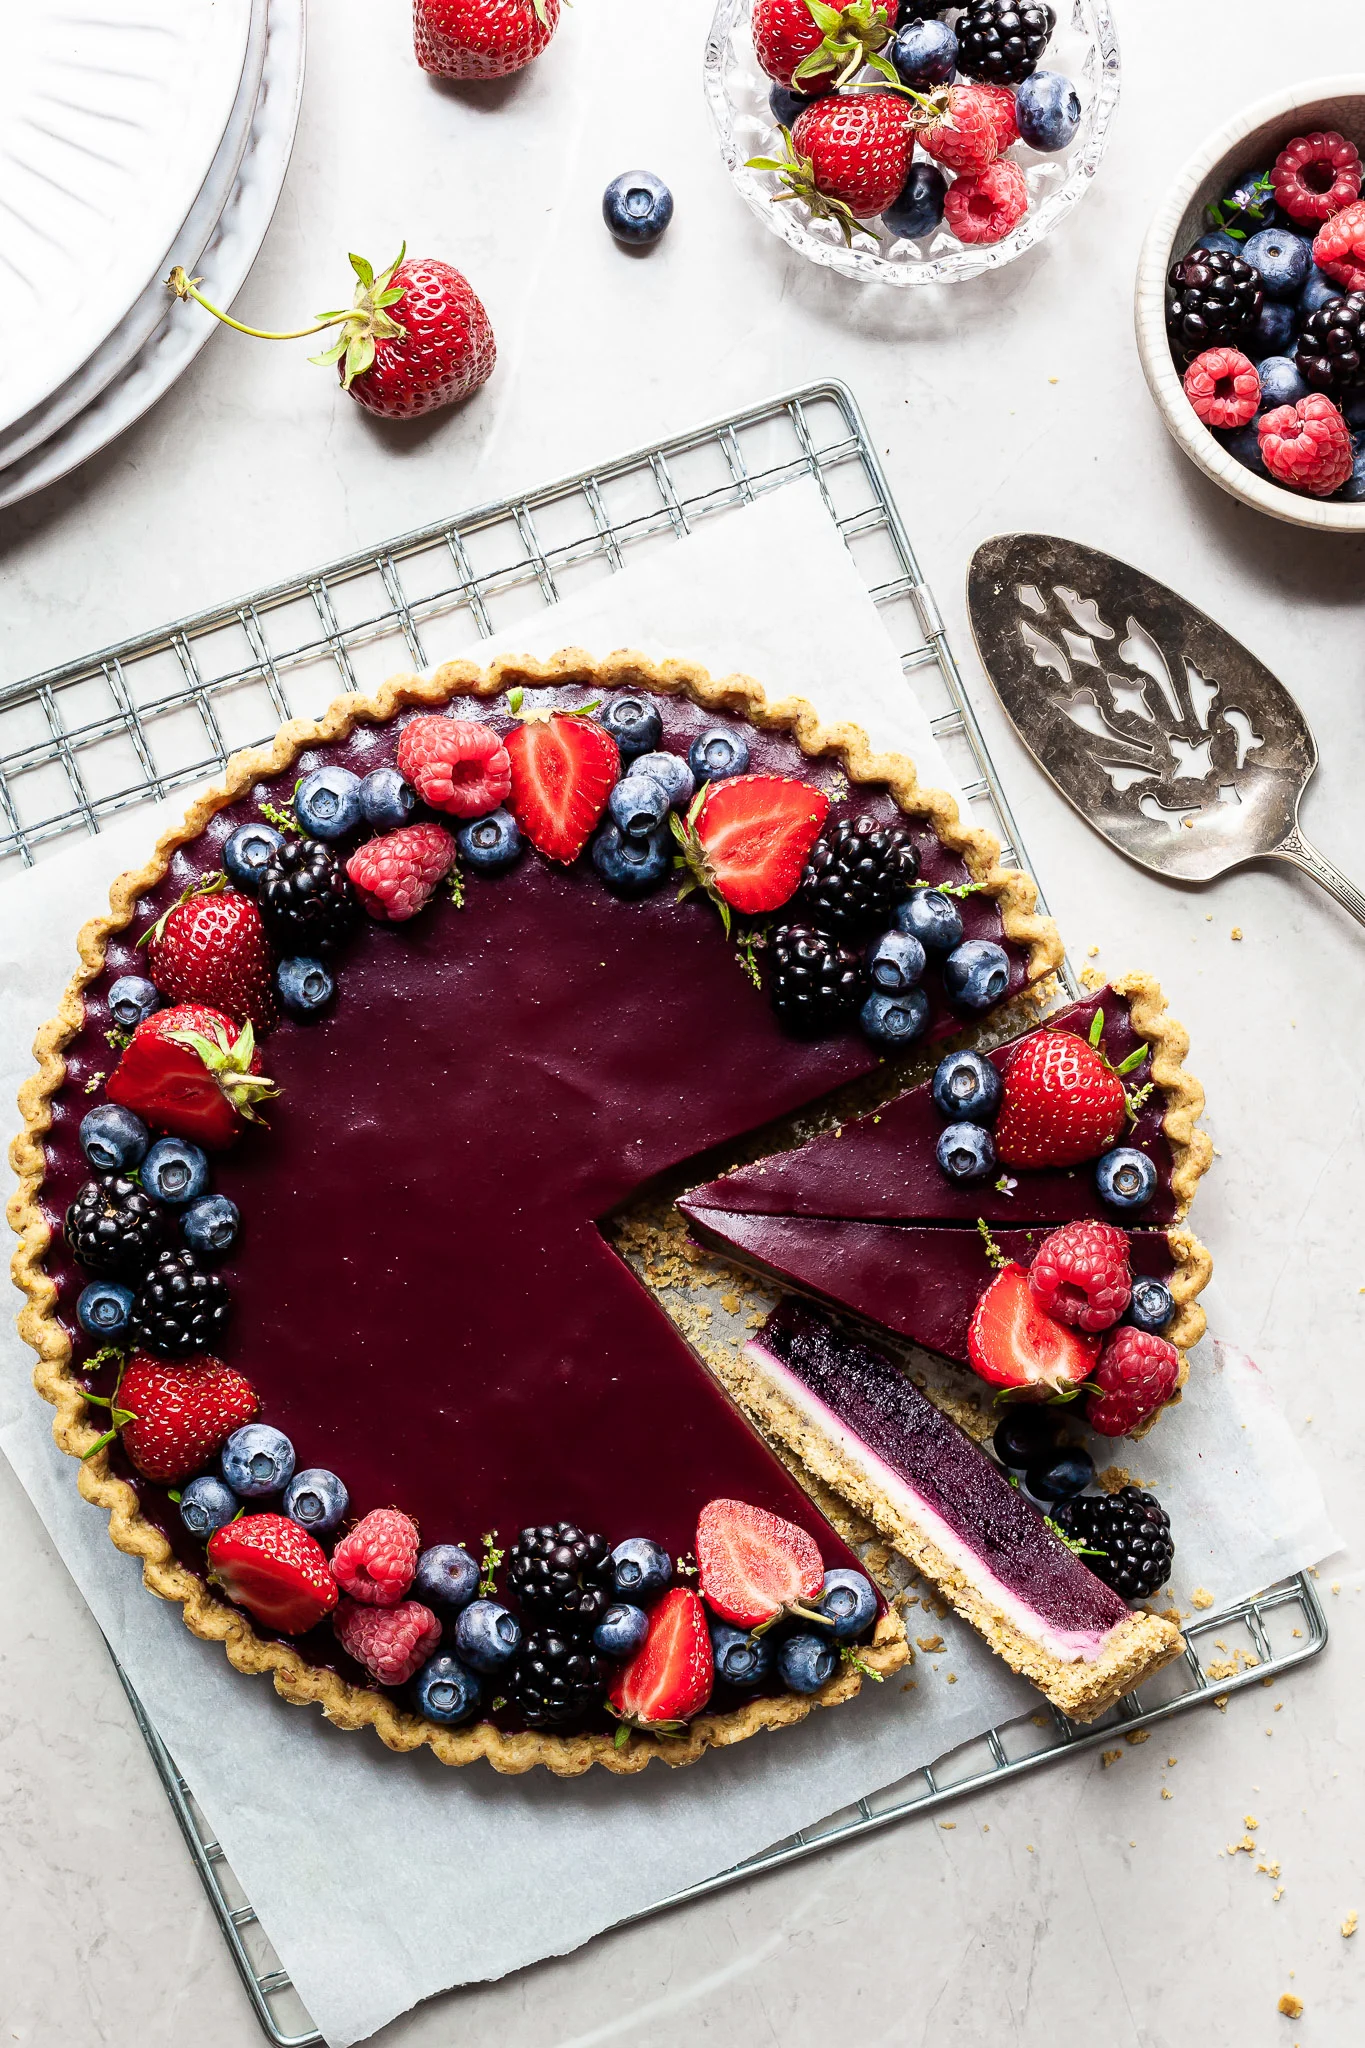 Flaylay of a purple tart with shortbread crust covered in summer berries. 3 slices are made with one on its side revealing the white chocolate ganache on the bottom.